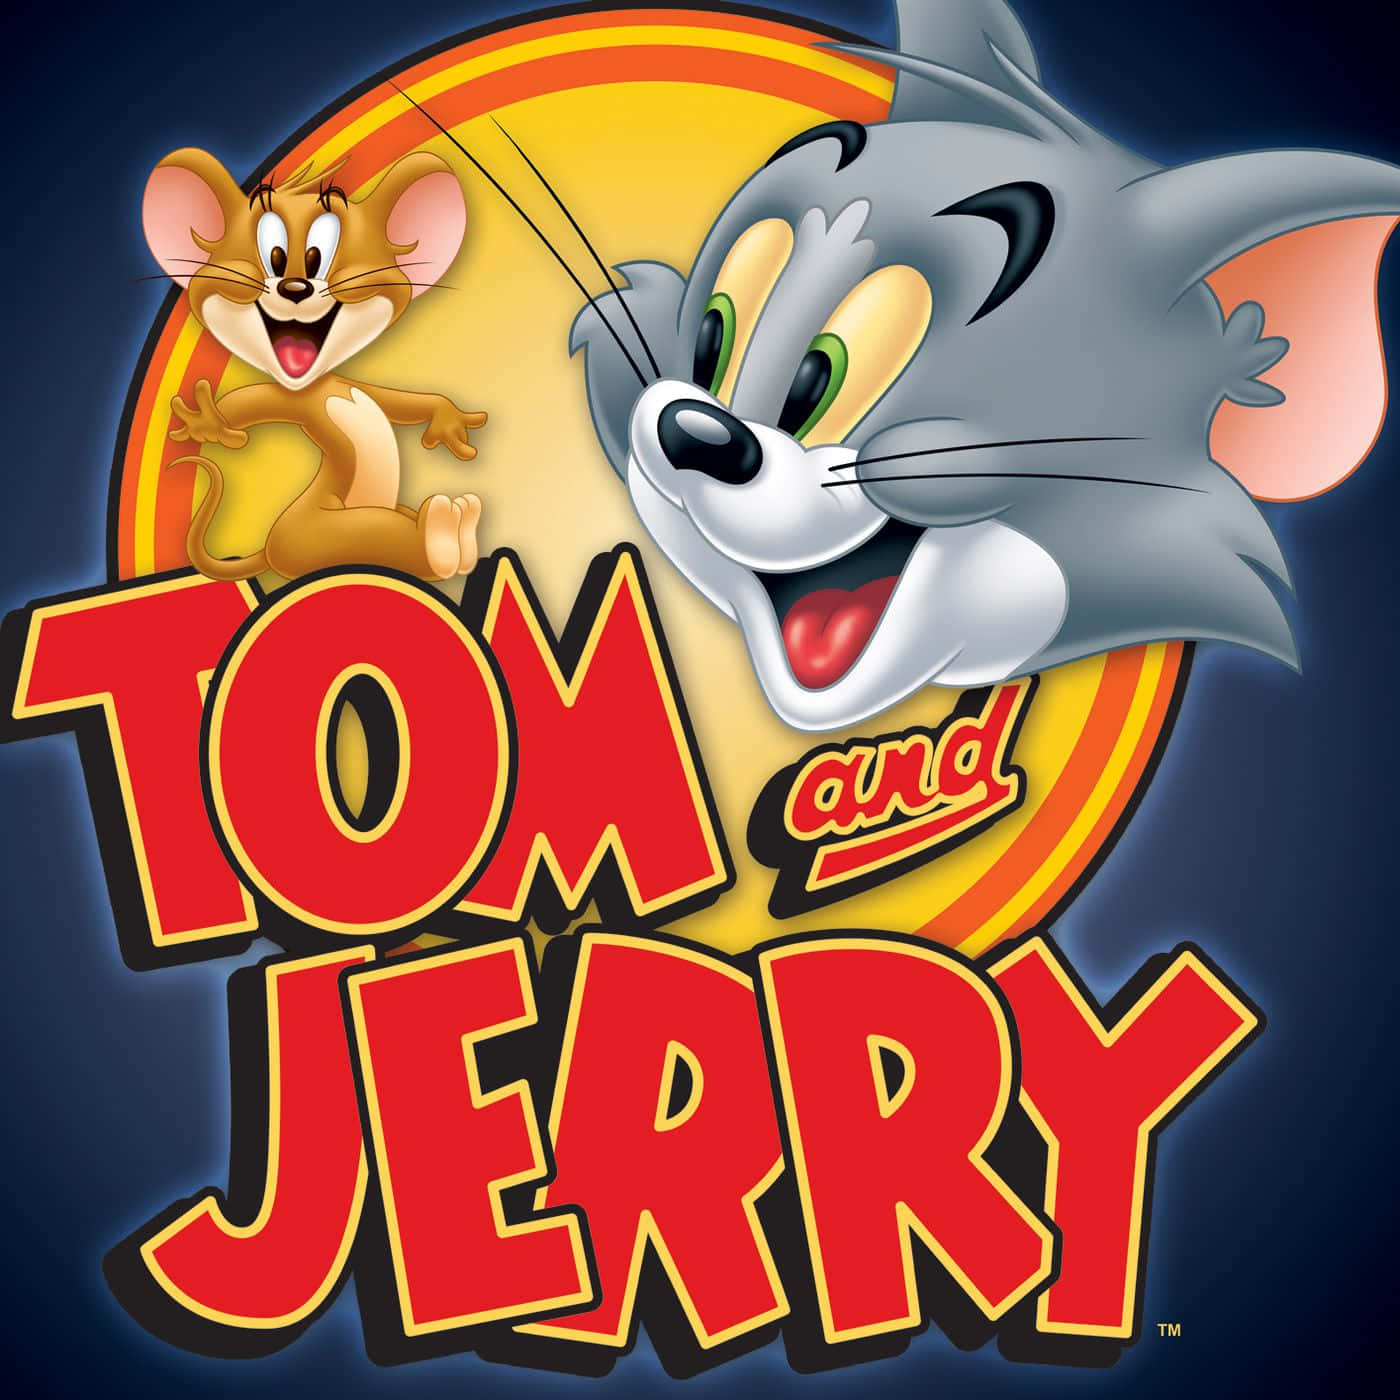 Tom and Jerry have a long history of outsmarting each other.